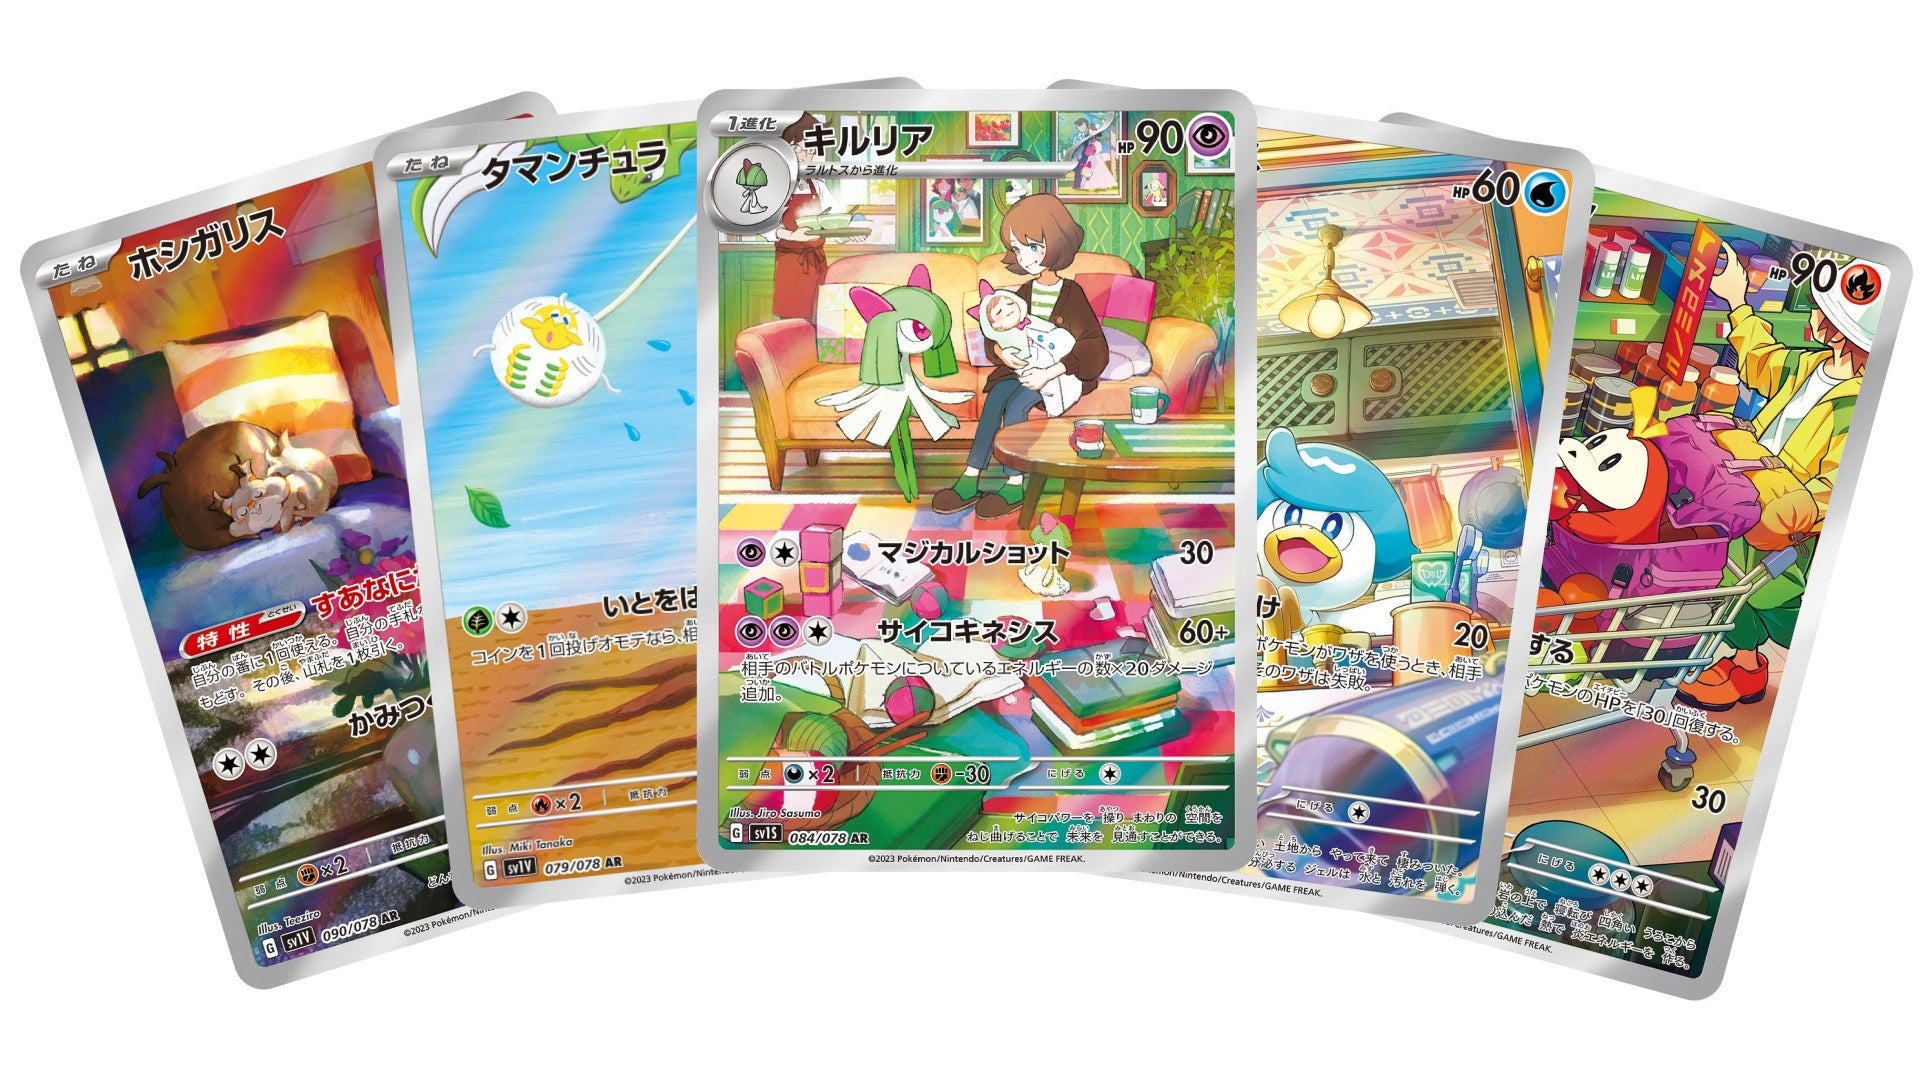 Pokemon Scarlet and Violet Leaks Are Essentially Game Freak's Marketing